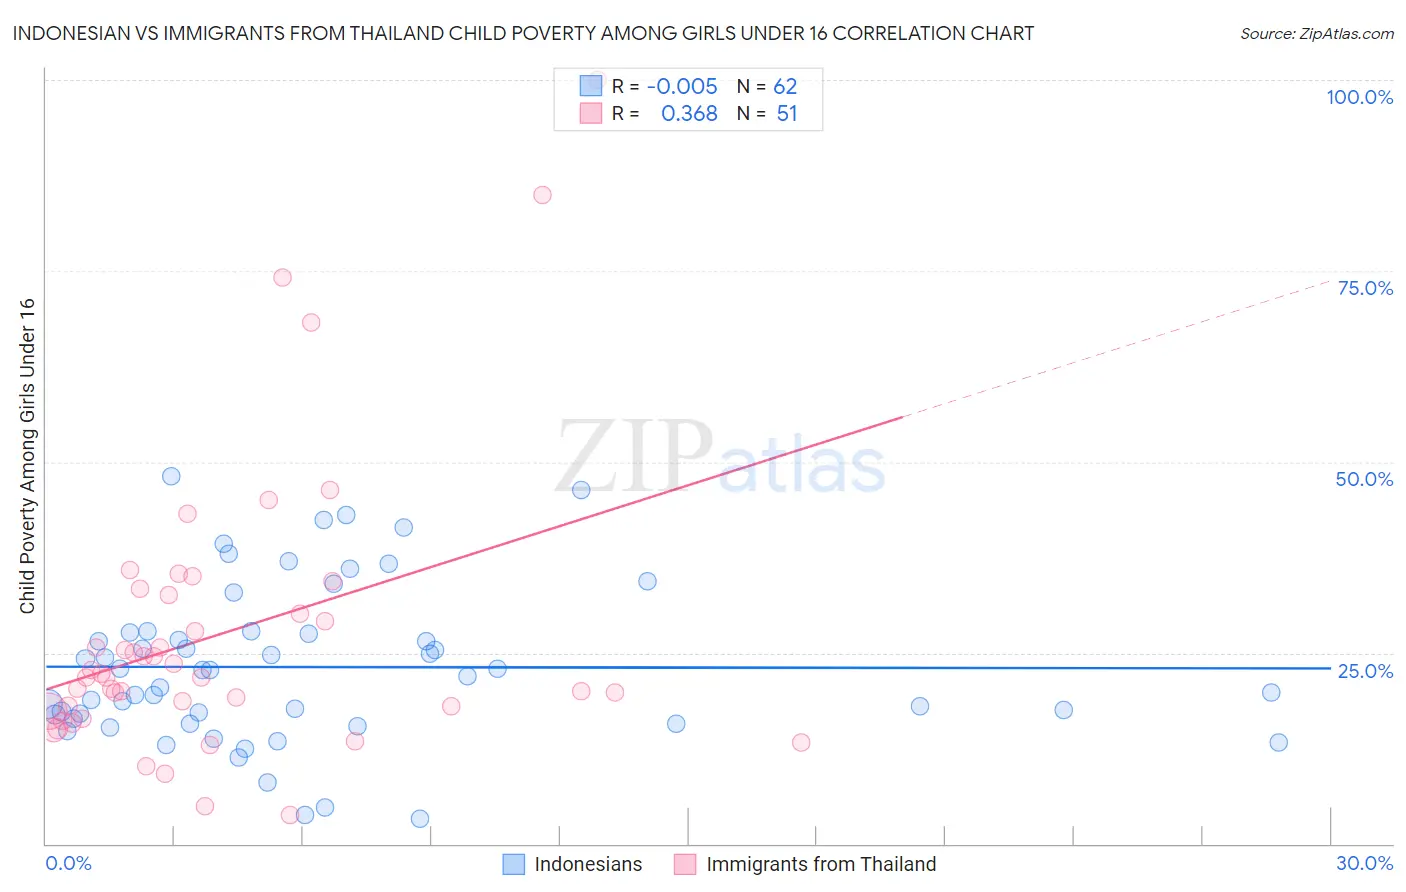 Indonesian vs Immigrants from Thailand Child Poverty Among Girls Under 16